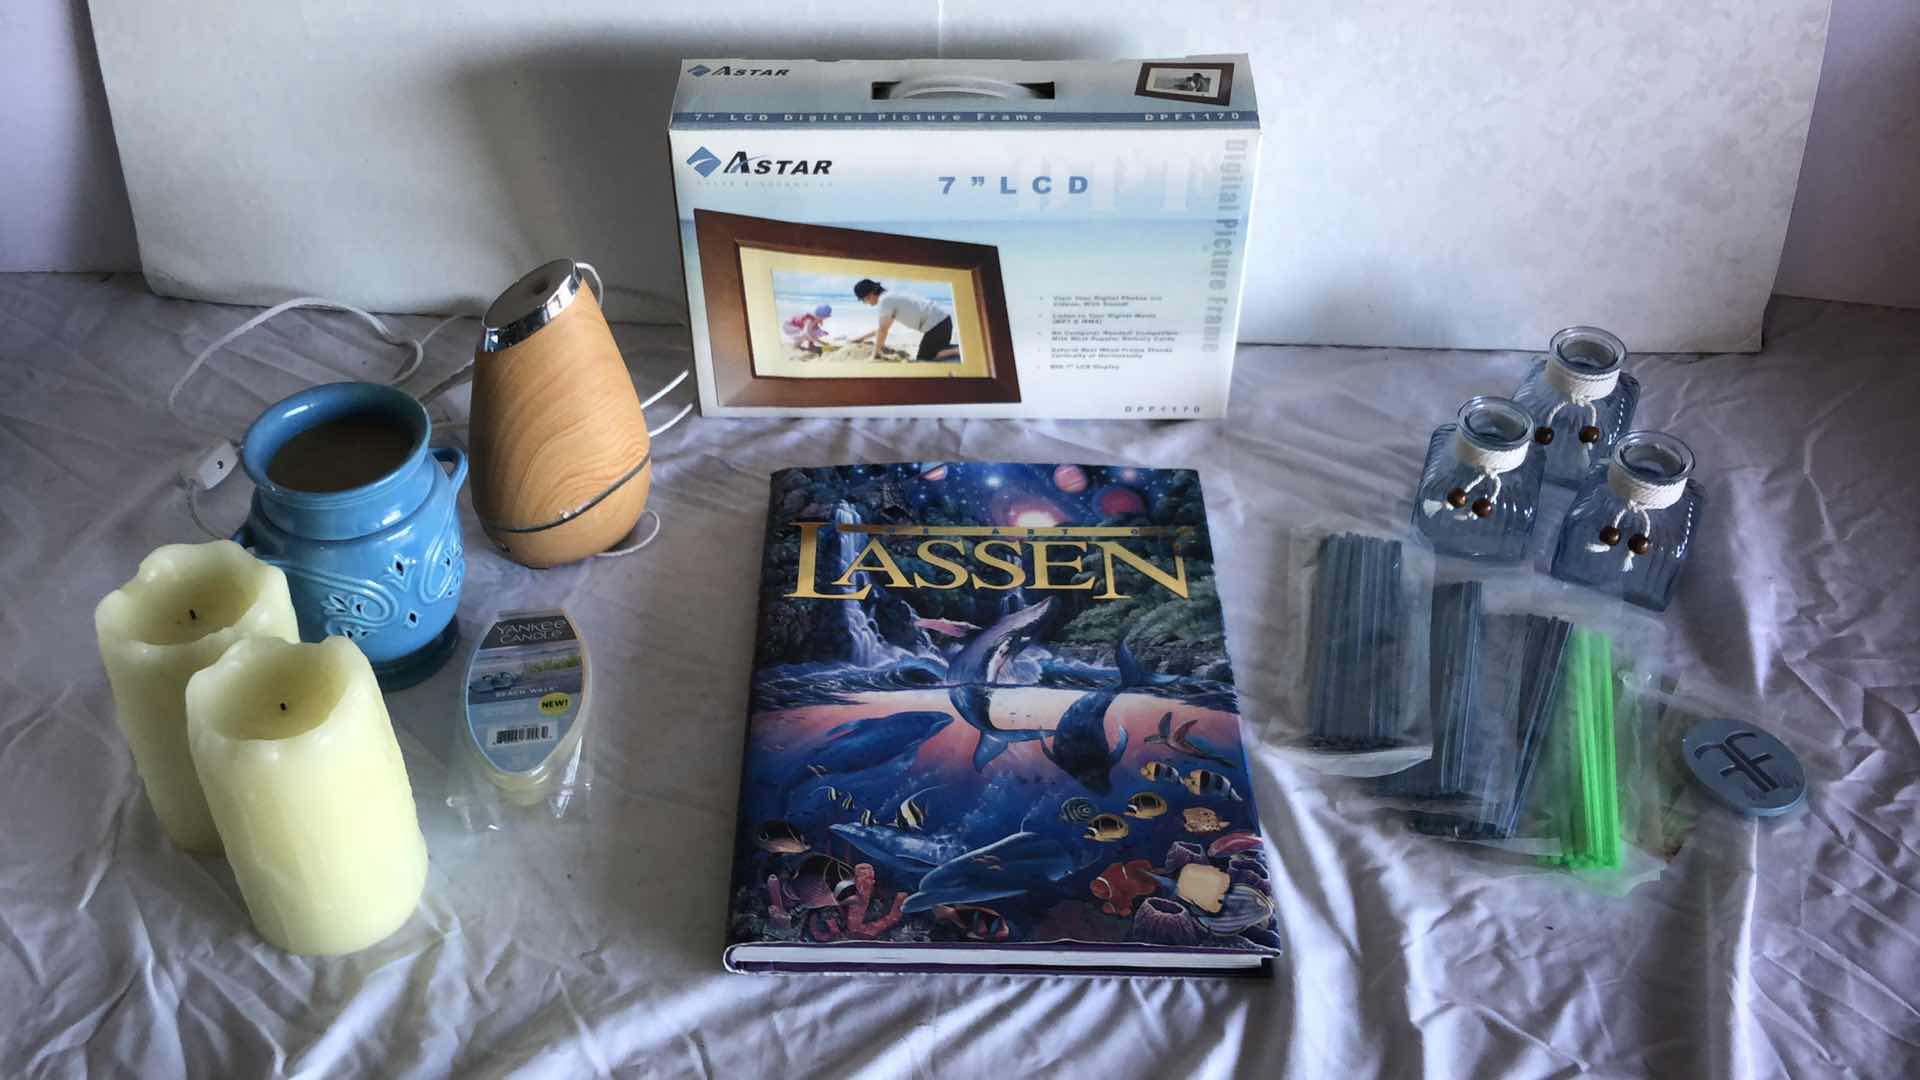 Photo 1 of FOR HER - ASTAR 7” DIGITAL PICTURE FRAME, THE ART OF LASSEN BOOK, ASSORTMENT OF HOME FRAGRANCES